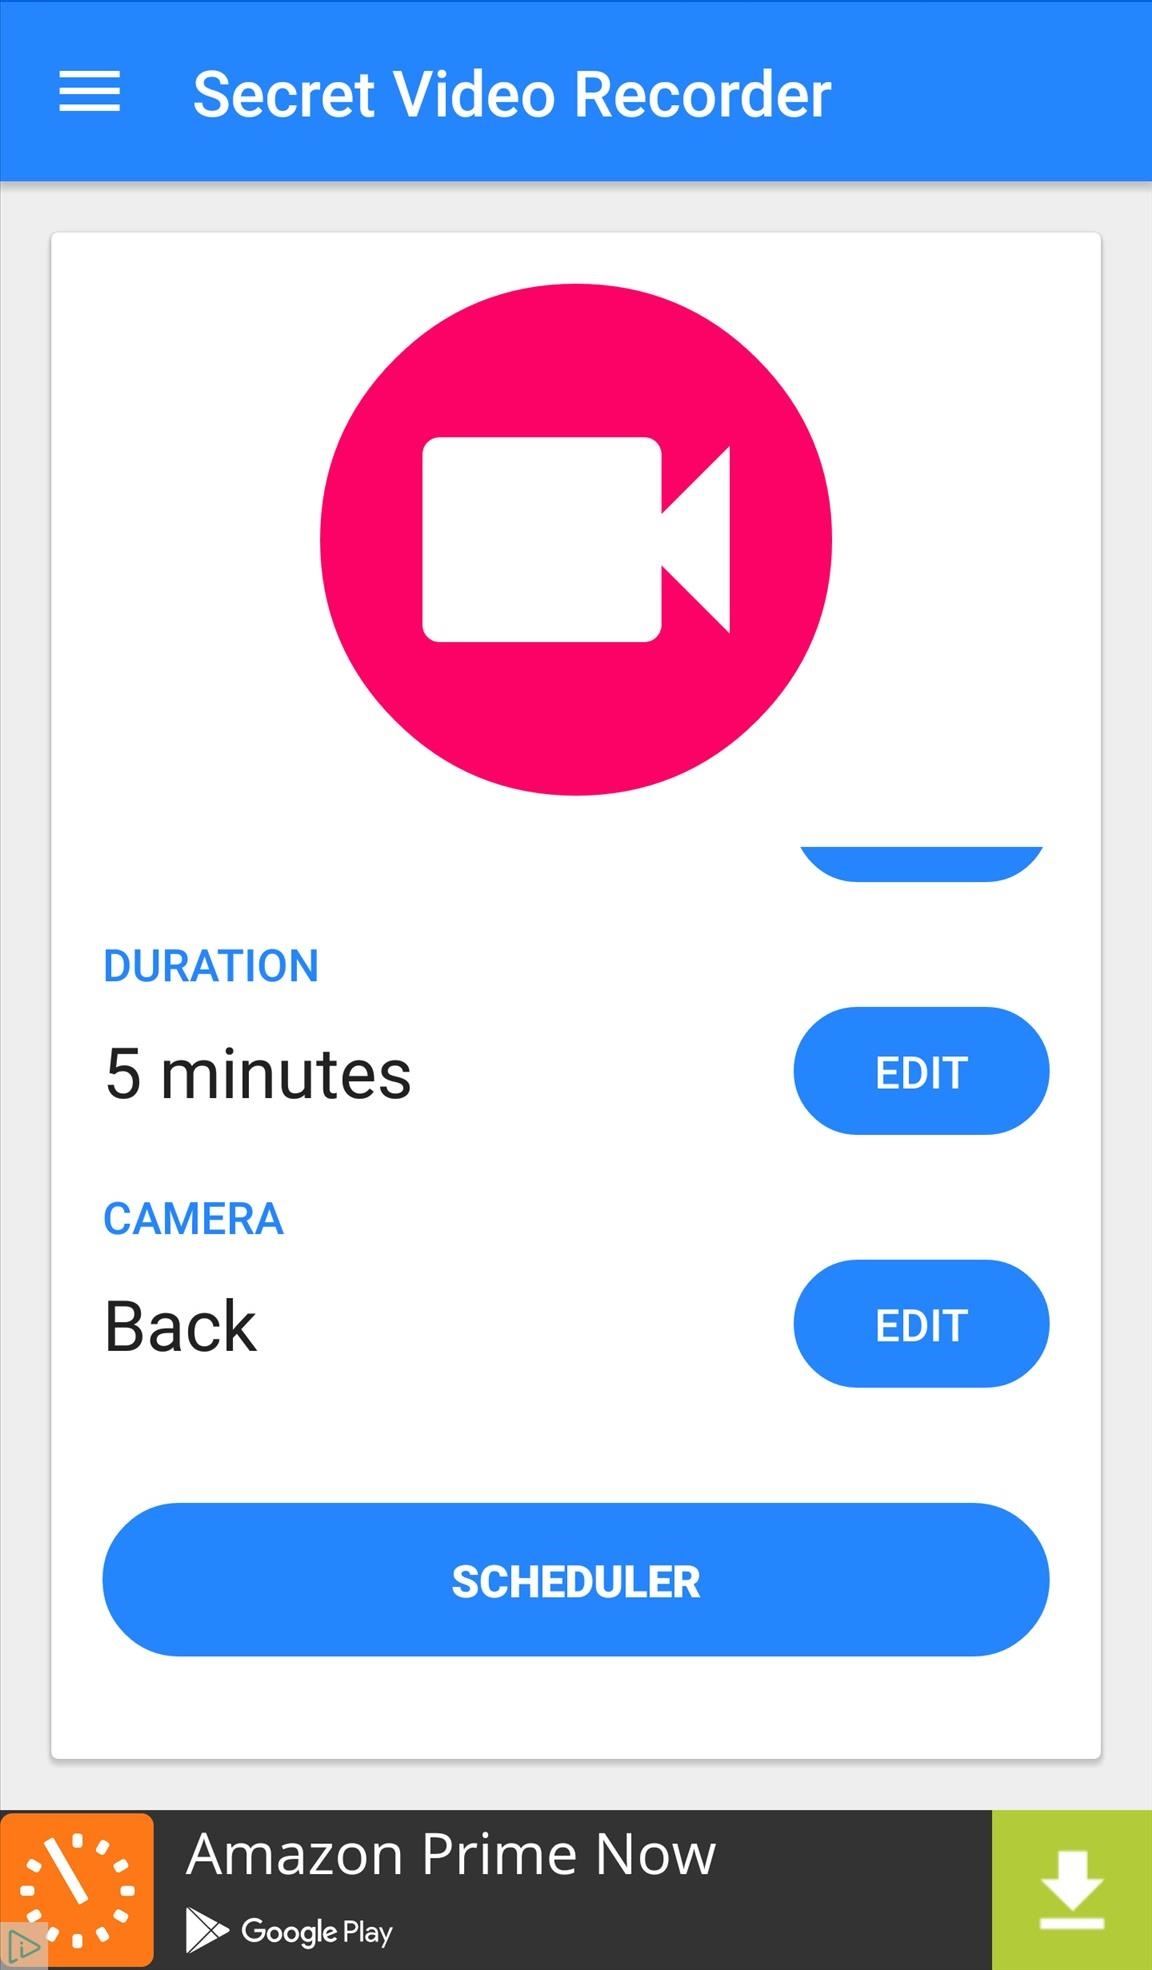 How to Secretly Record Videos on Android